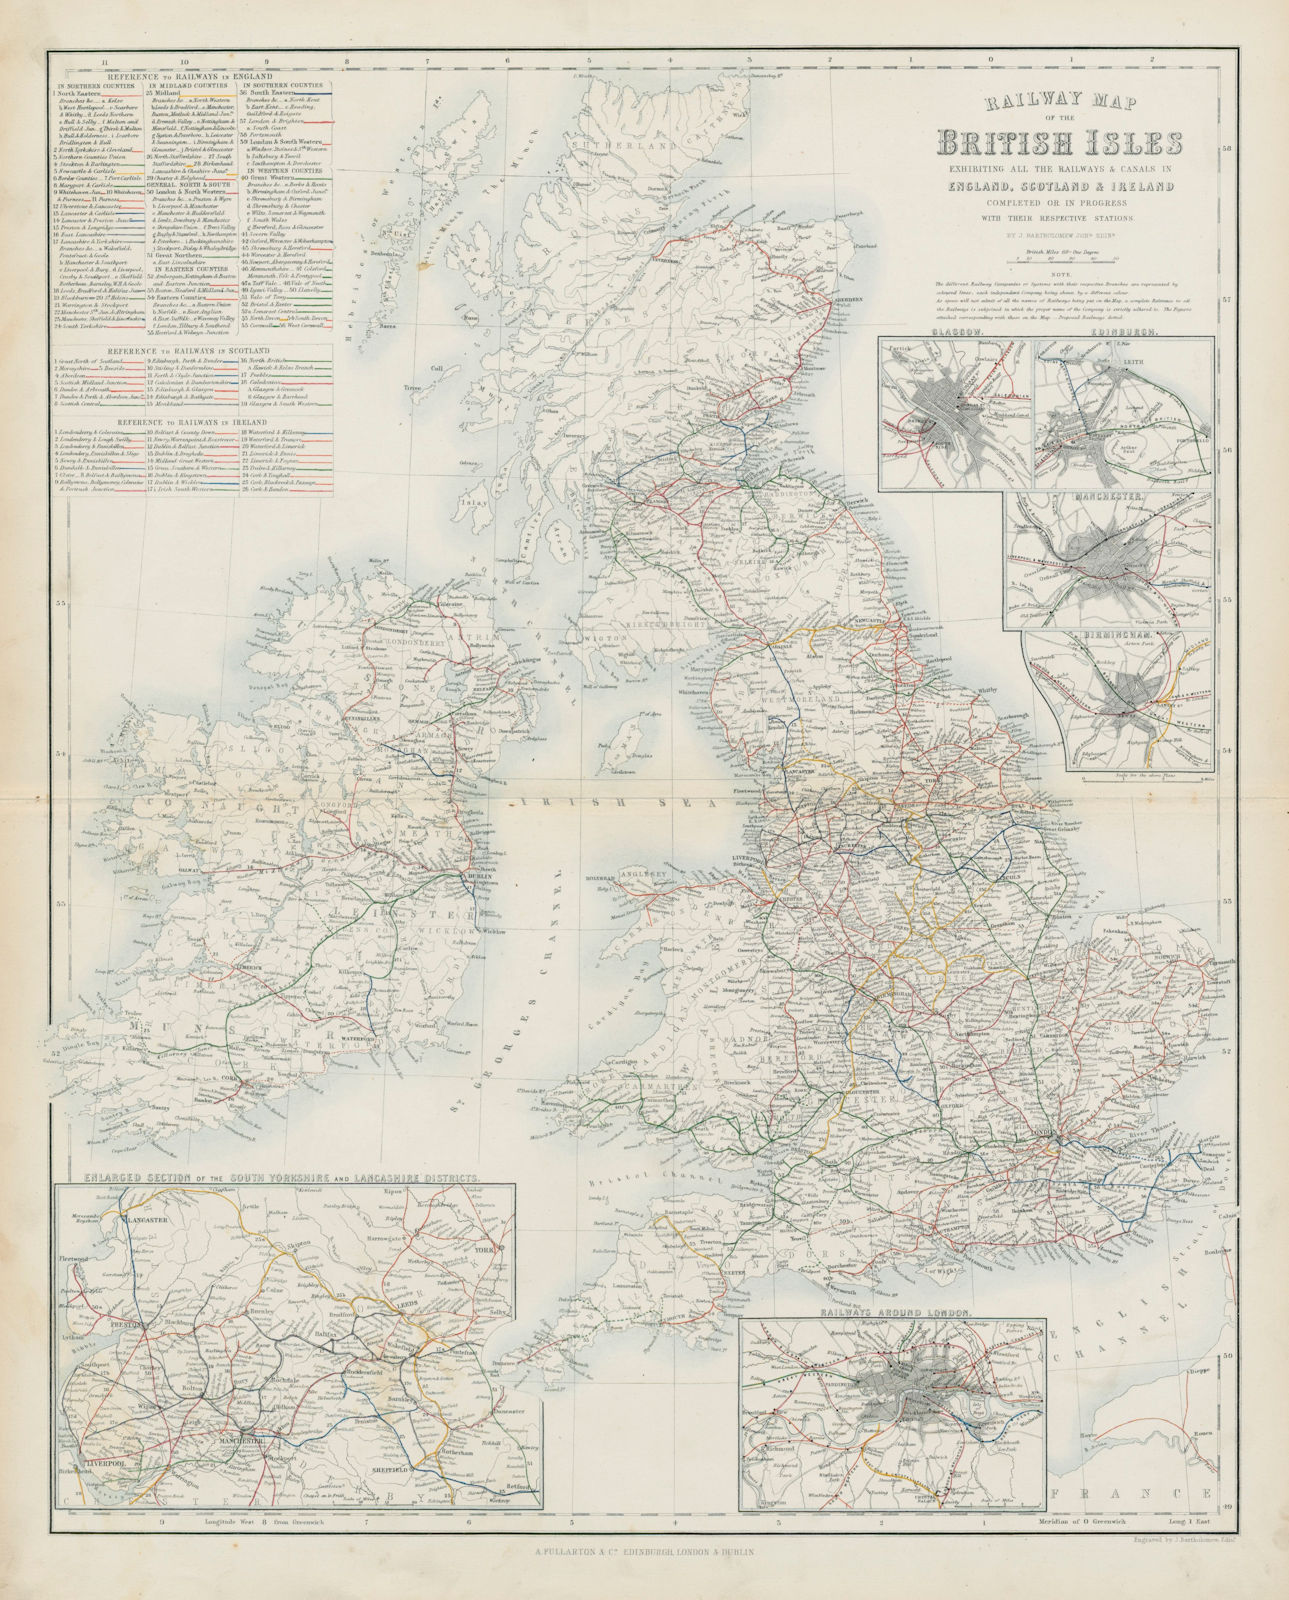 Railway Map of the British Isles. SWANSTON 1860 old antique plan chart